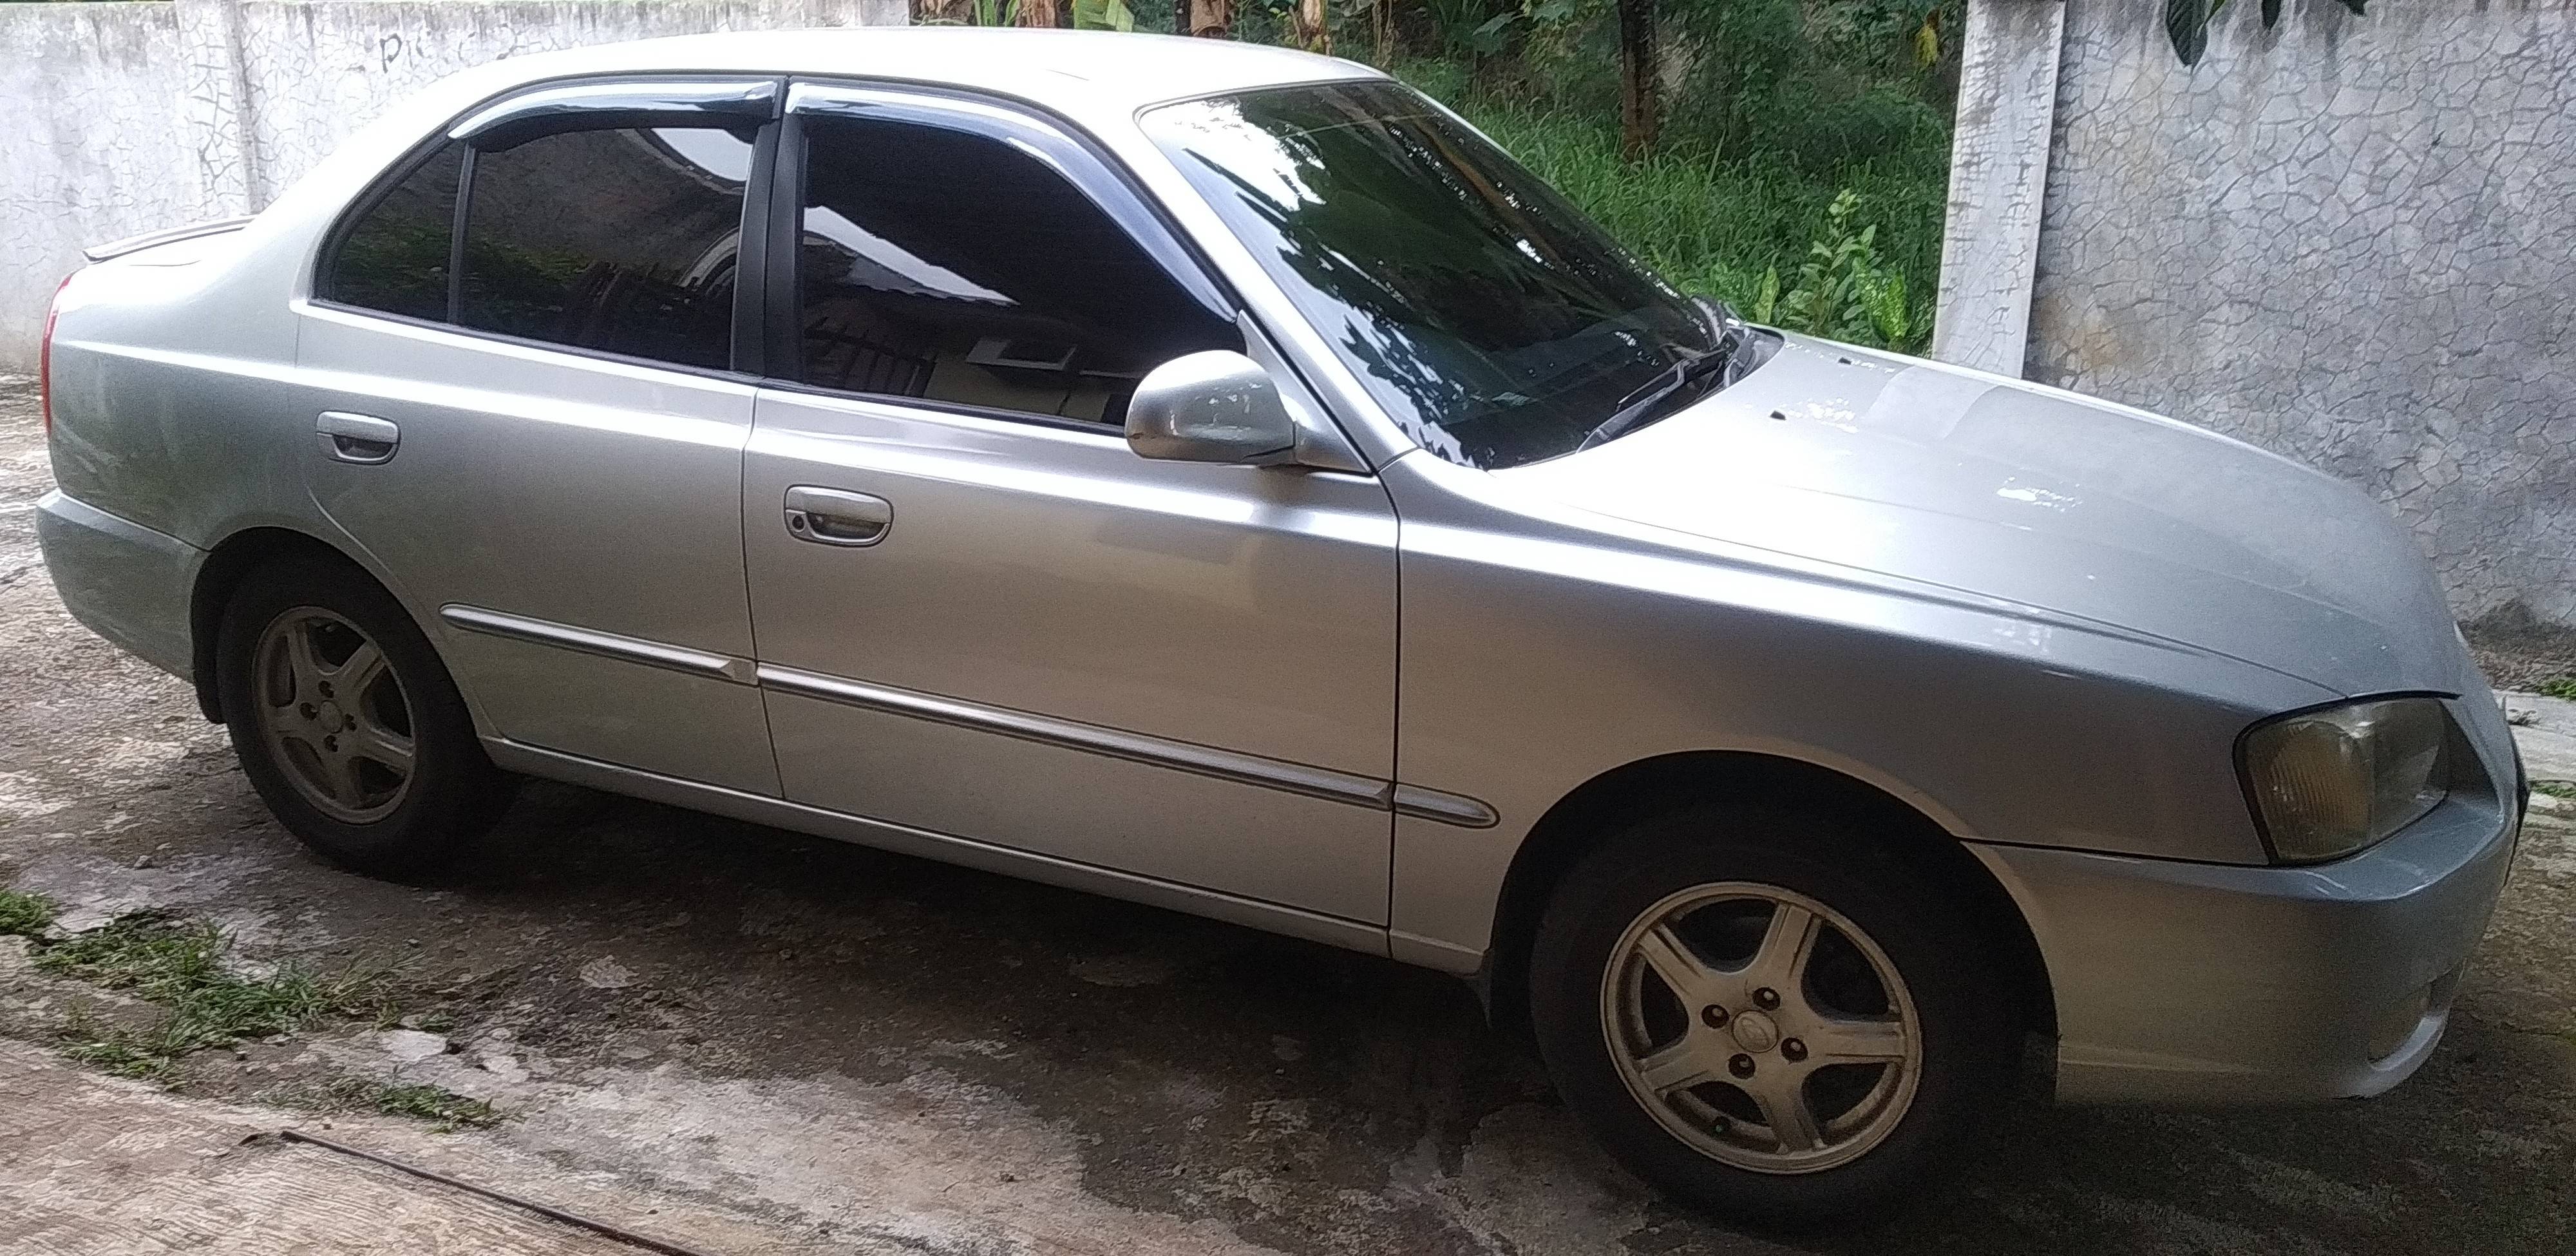 Used 2002 Hyundai Accent gls gls for sale